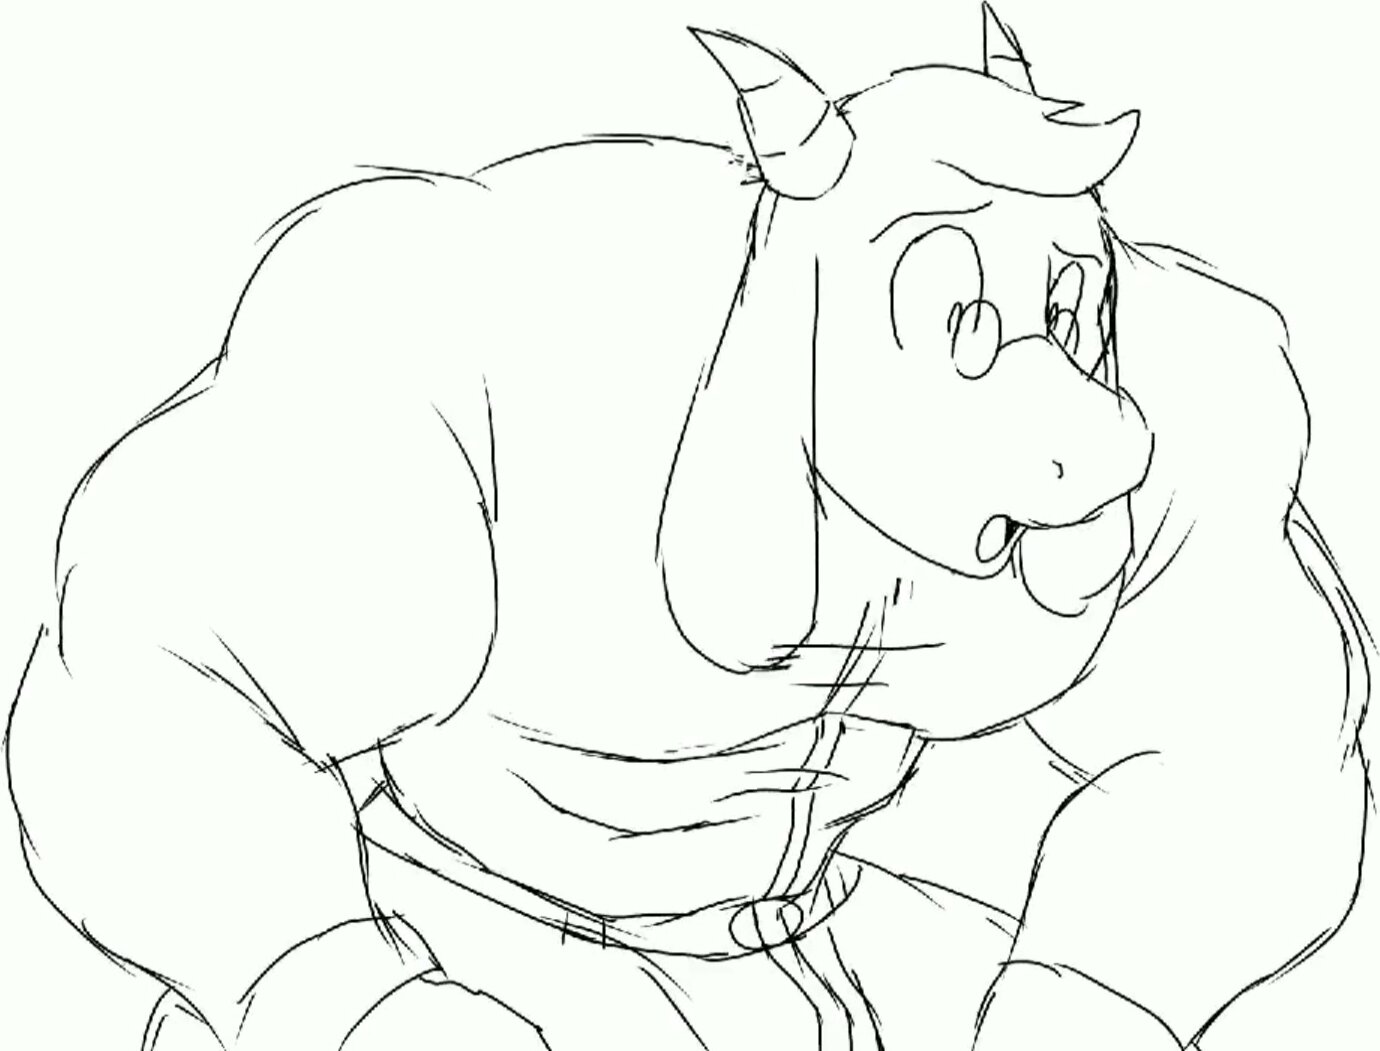 Asriel muscle growth short version - ThisVid.com